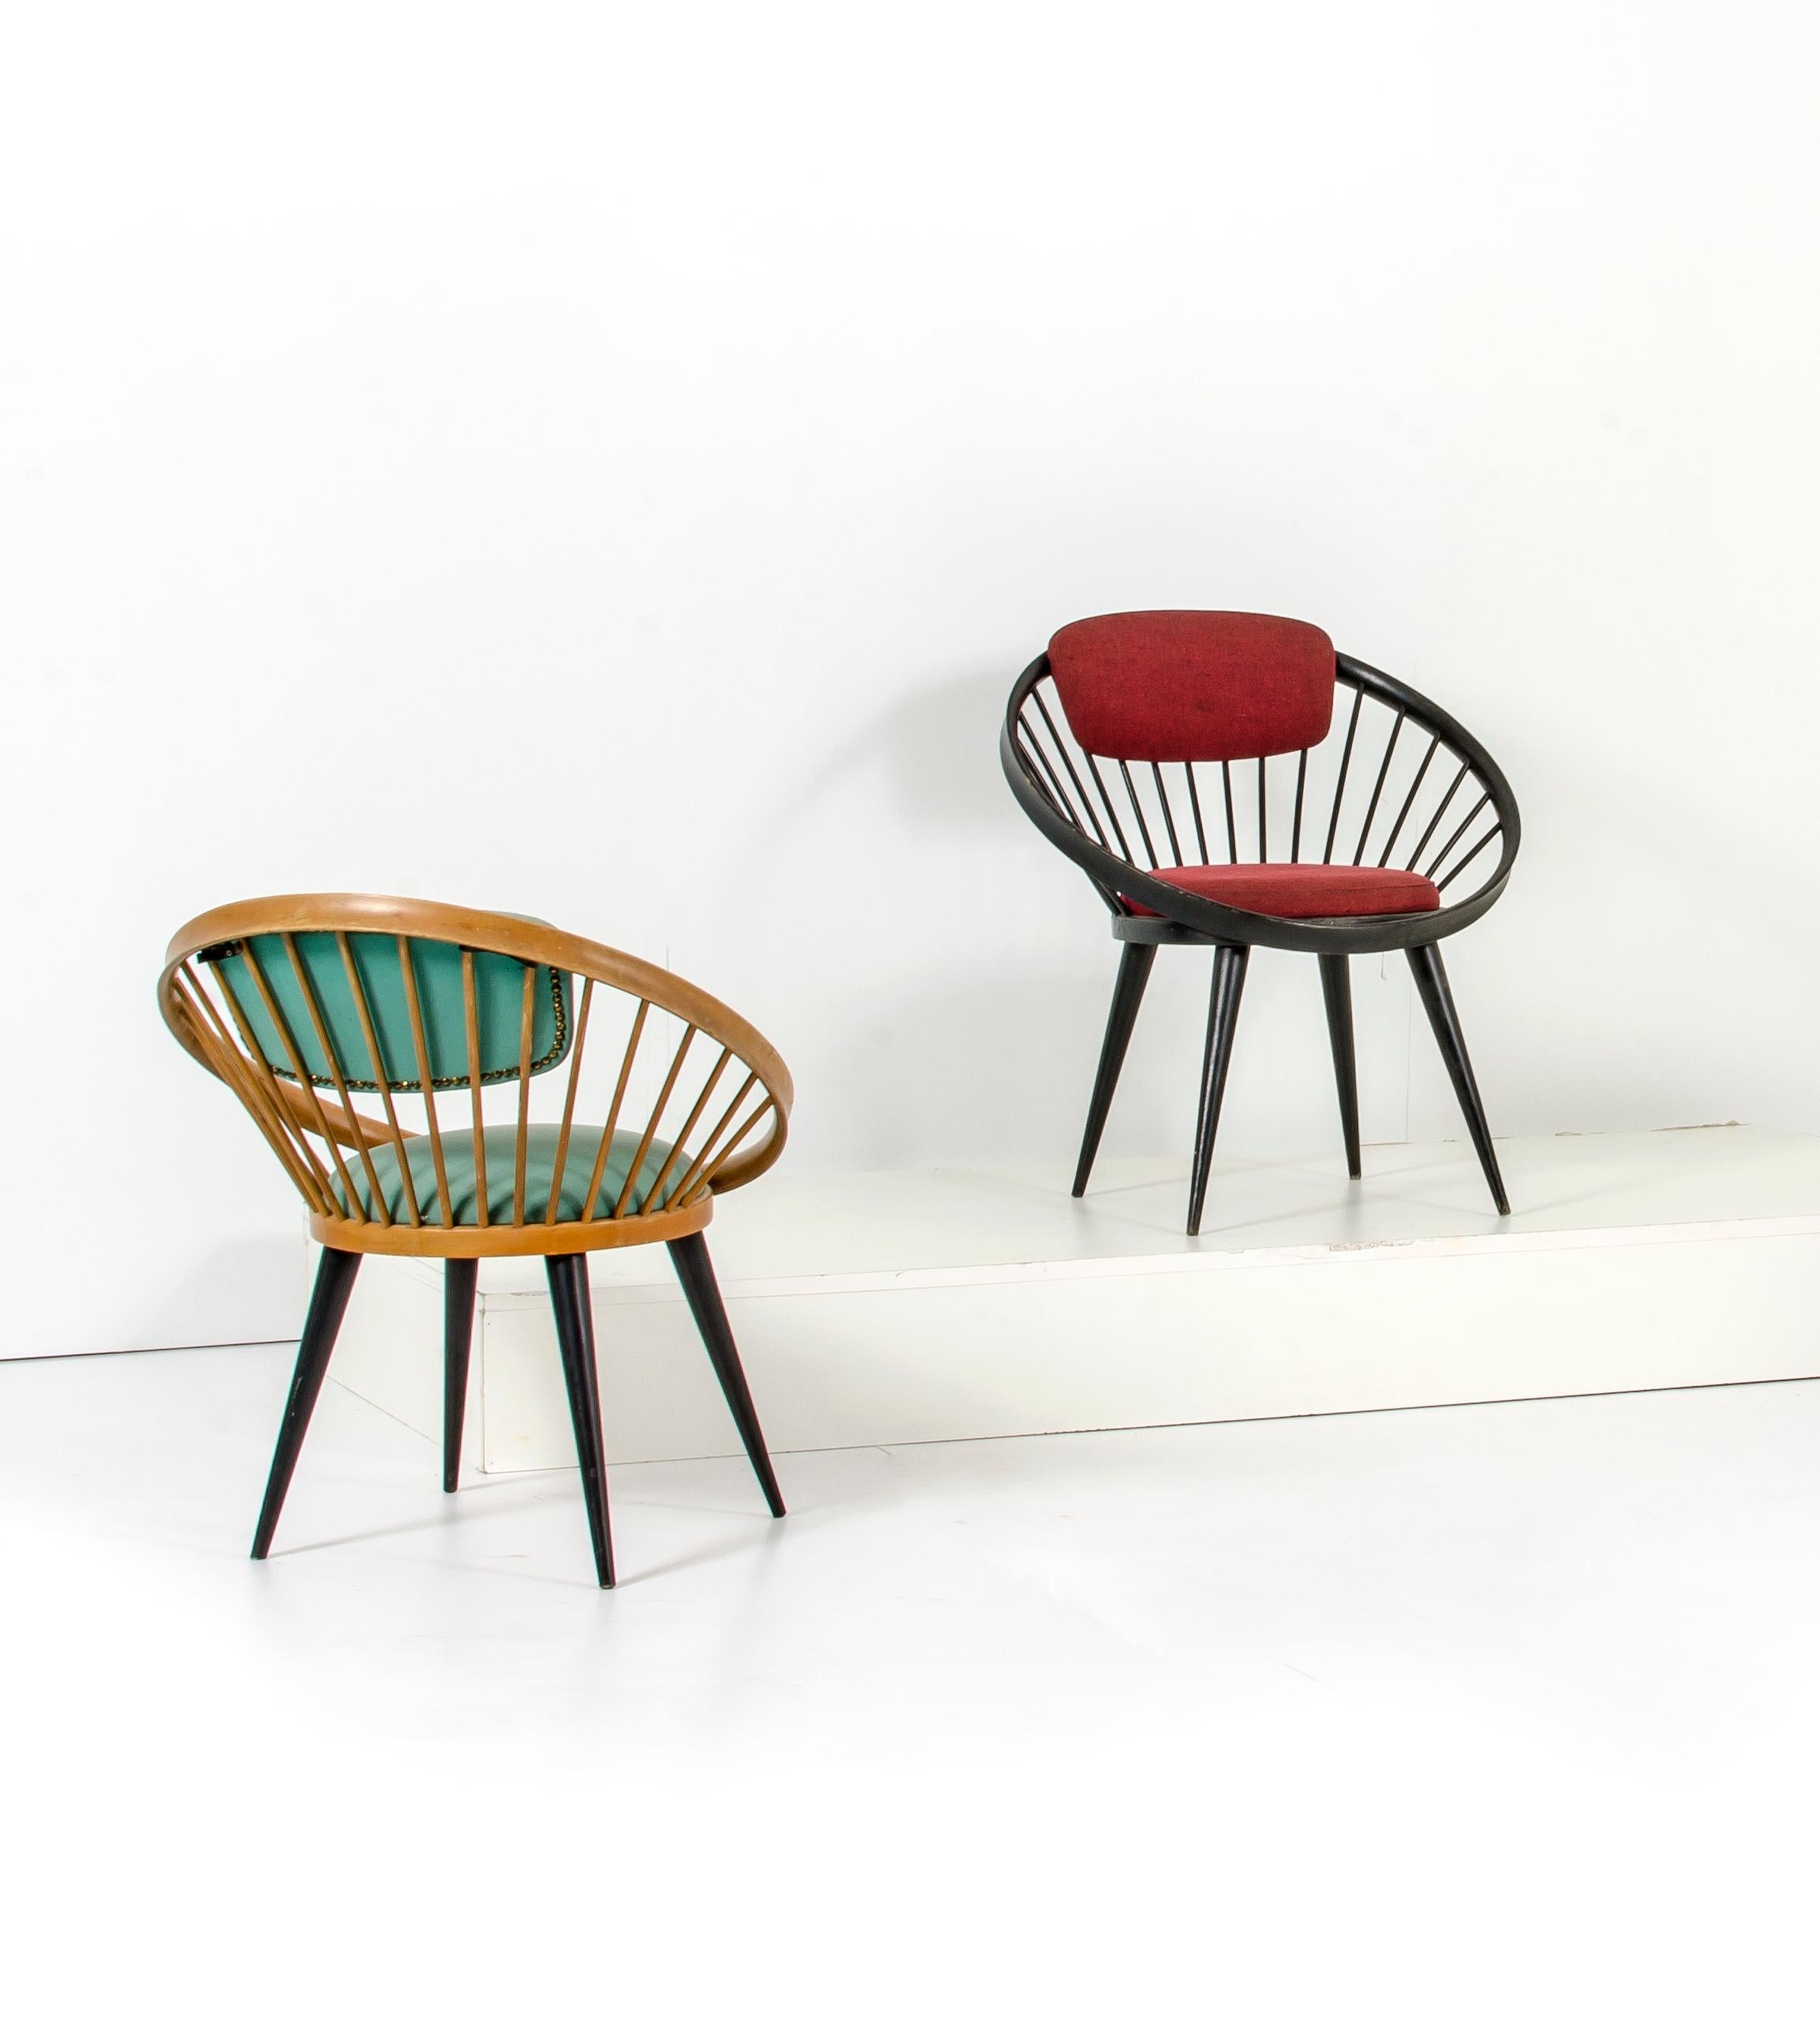 Three Yngve Ekström Mid-Century circle lounge chairs. Two of those chairs are made of bicolor lacquered beechwood and have green colored leather seats while the last one is in ebonized wood with red leather seat and backrest.

